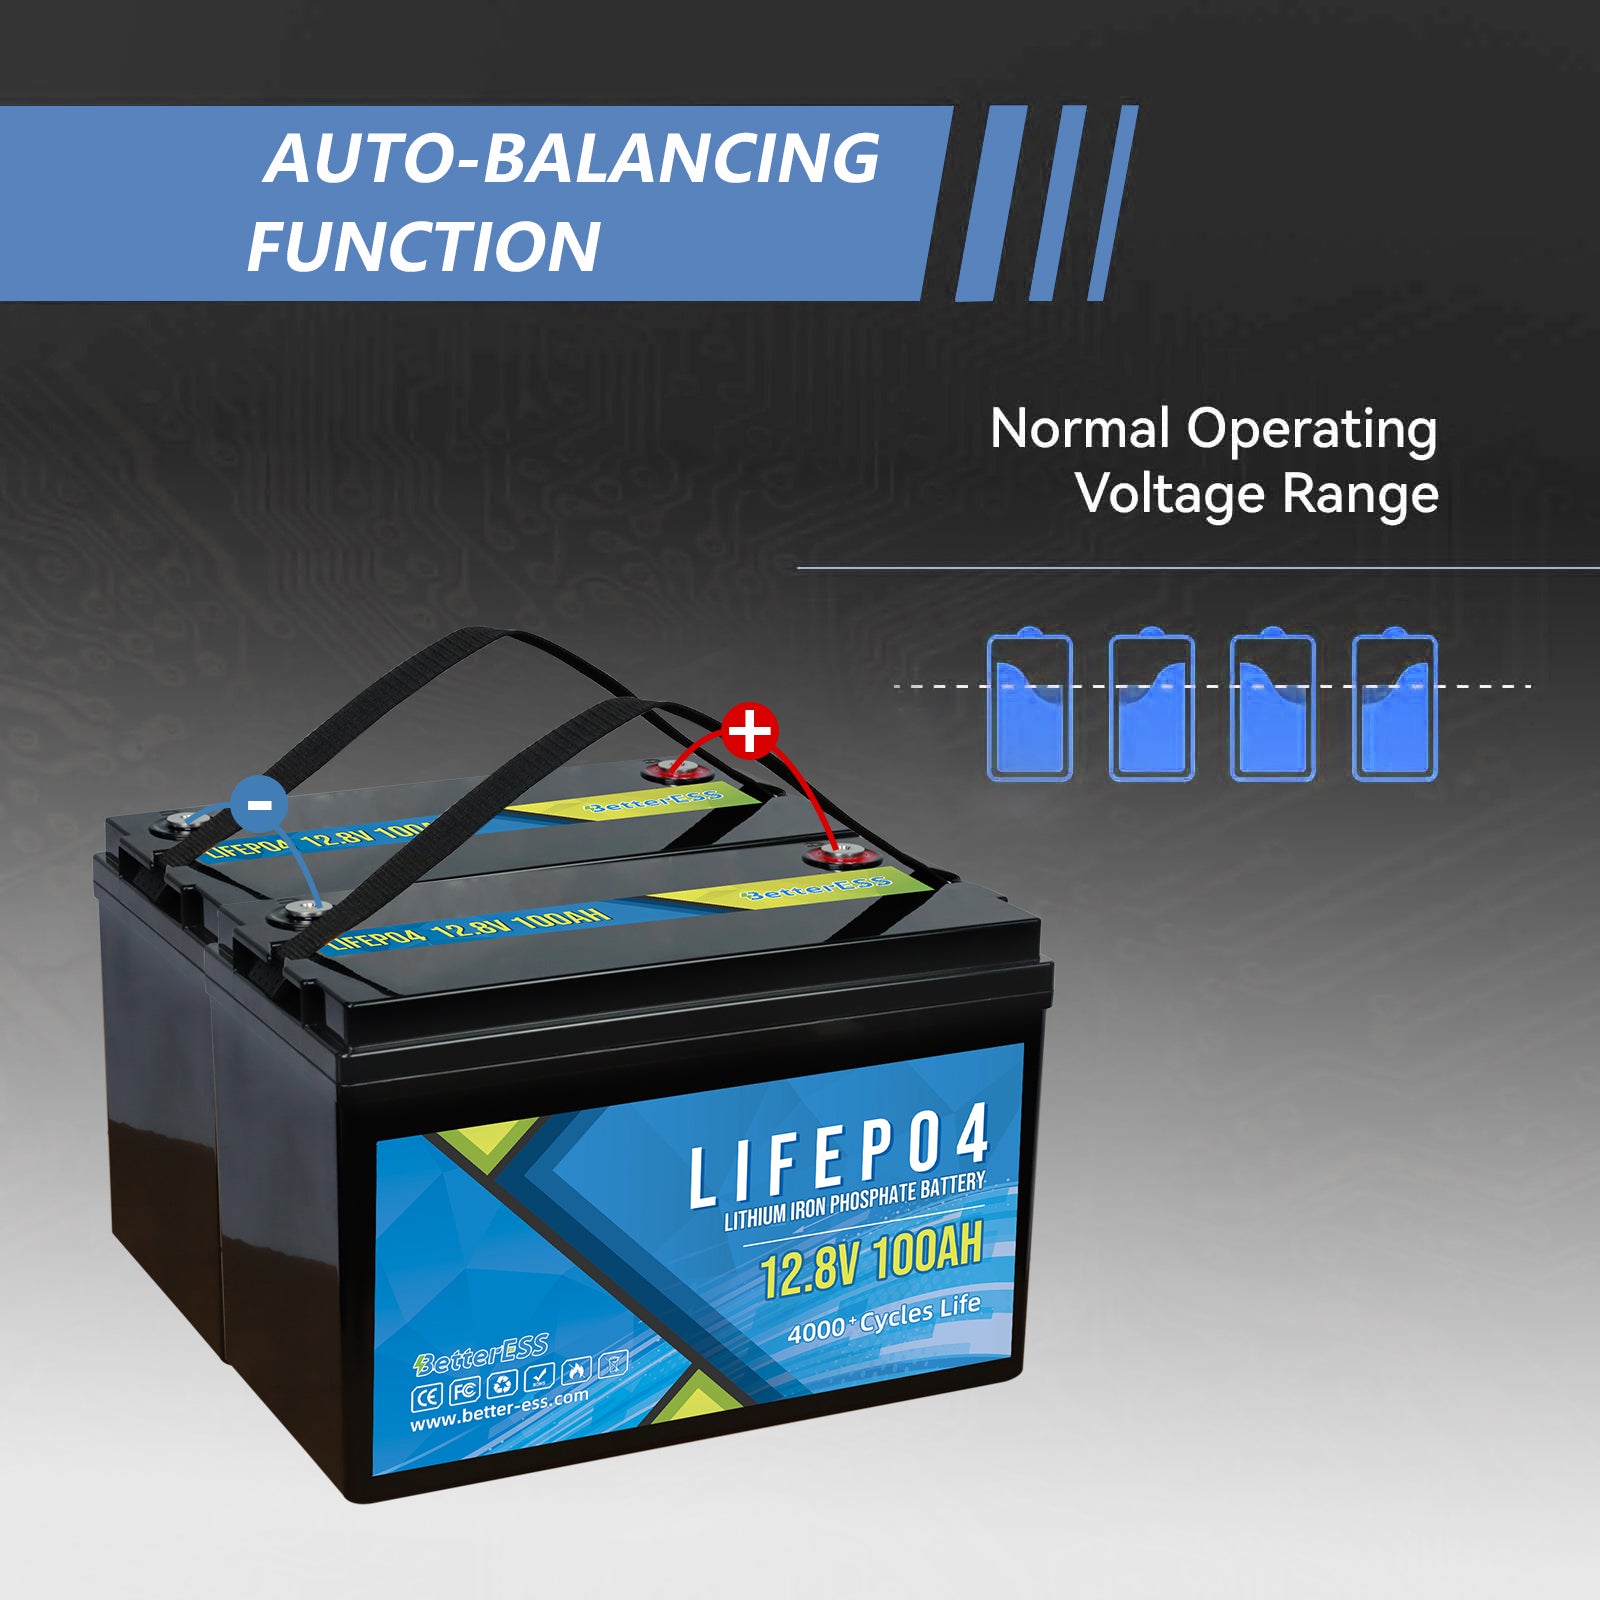 Better-ess Self-Heating 12V 100Ah LiFePO4 Lithium Battery with Bluetoo